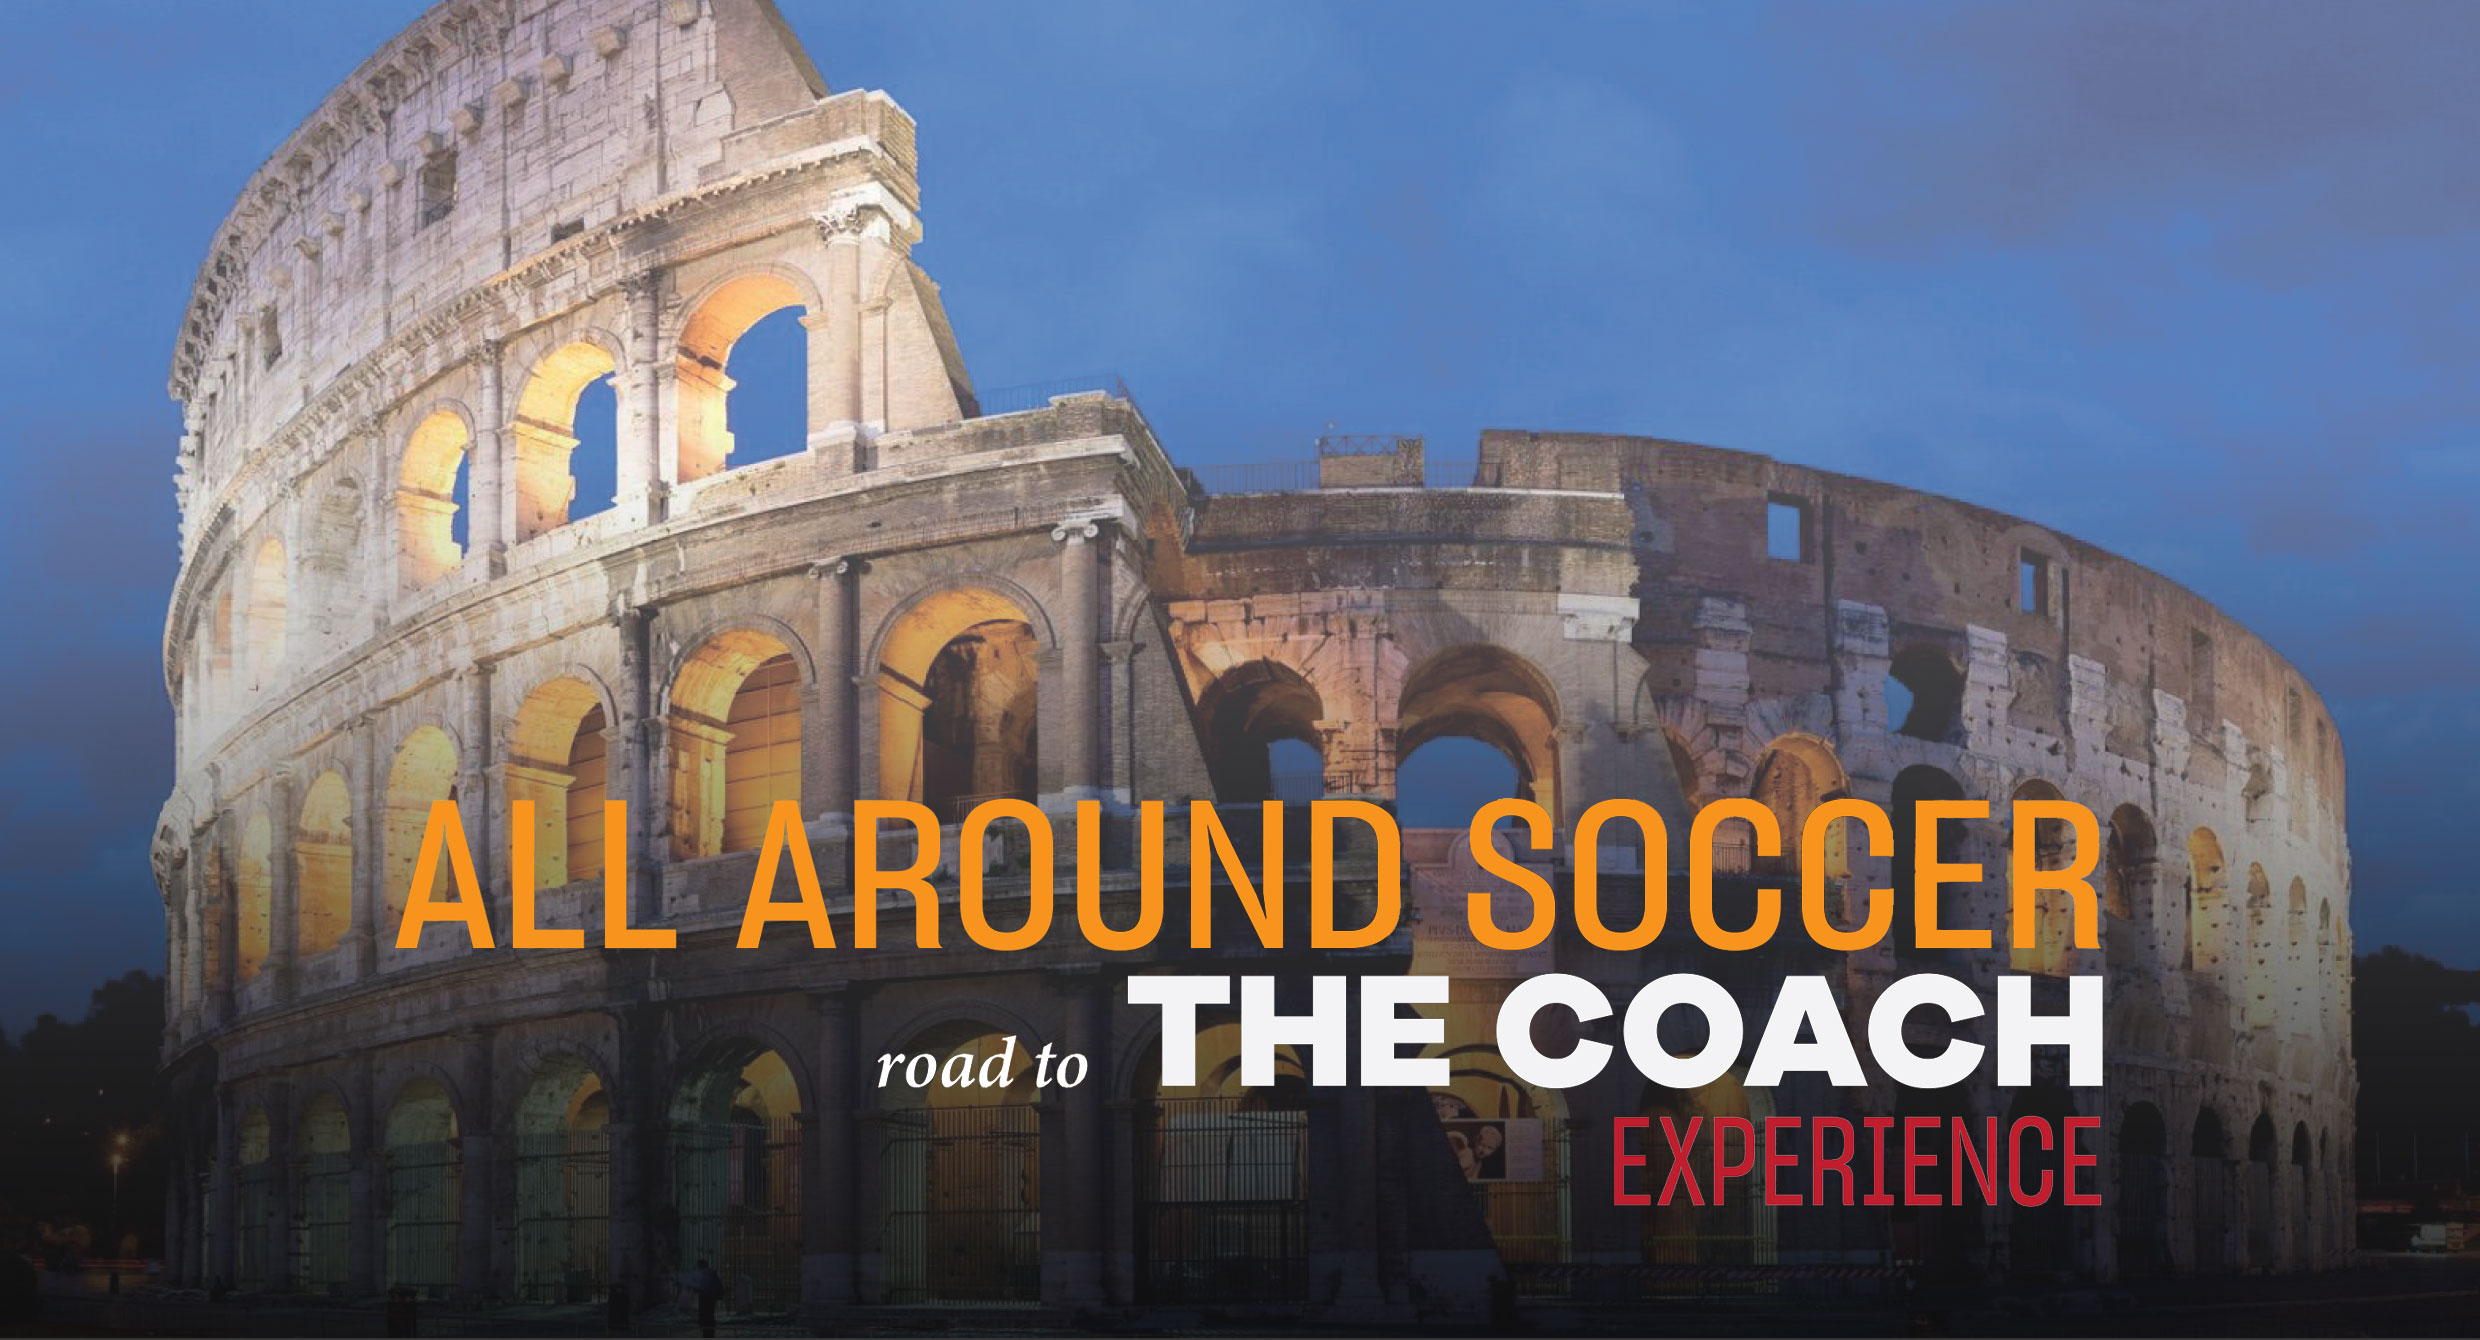 All Around Soccer: road to "The Coach Experience"